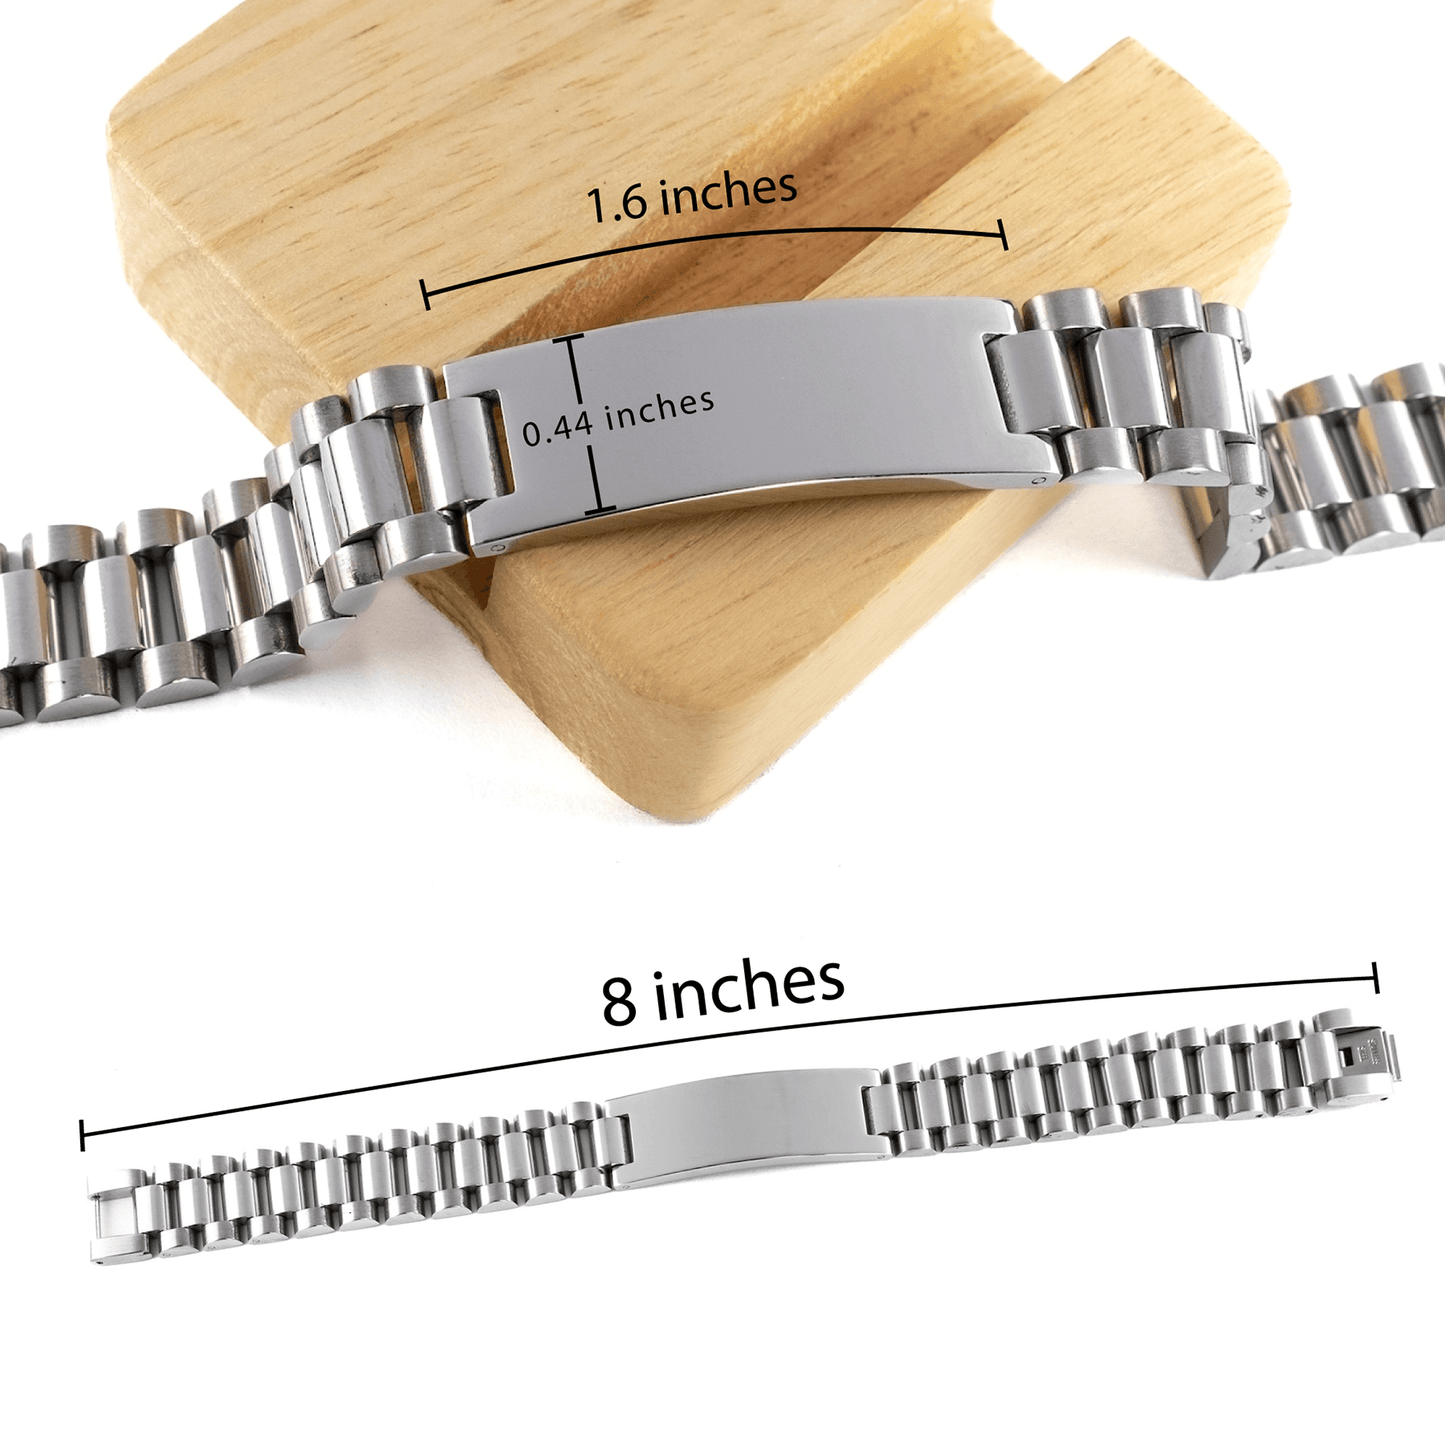 Physical Therapist Ladder Stainless Steel Engraved Bracelet - Thanks for being who you are - Birthday Christmas Jewelry Gifts Coworkers Colleague Boss - Mallard Moon Gift Shop